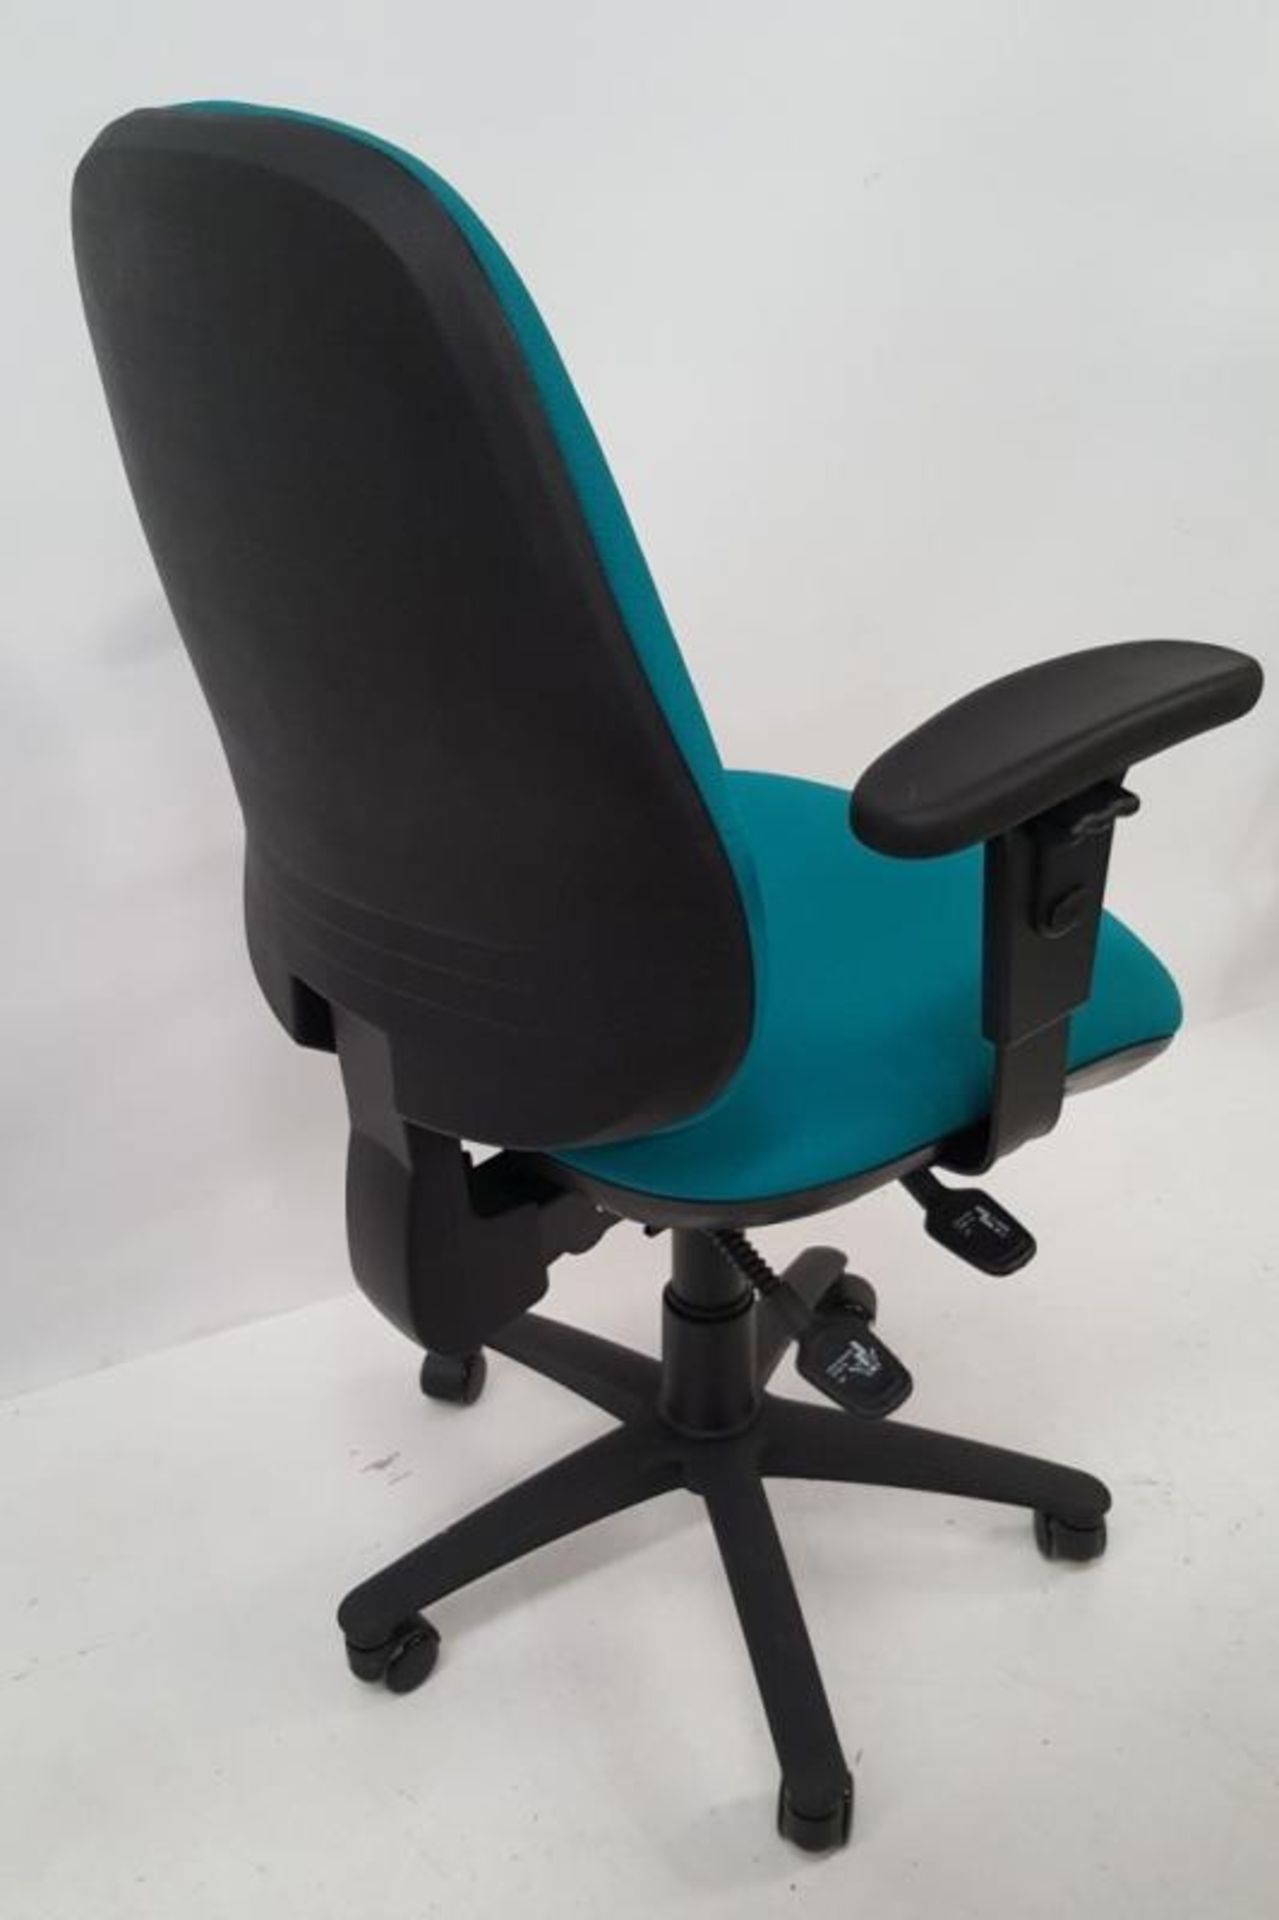 4 x OCEE Design ‘TICK’ Premium High Back Office Chairs In Turquoise With Adjustable Height And Synch - Image 8 of 9